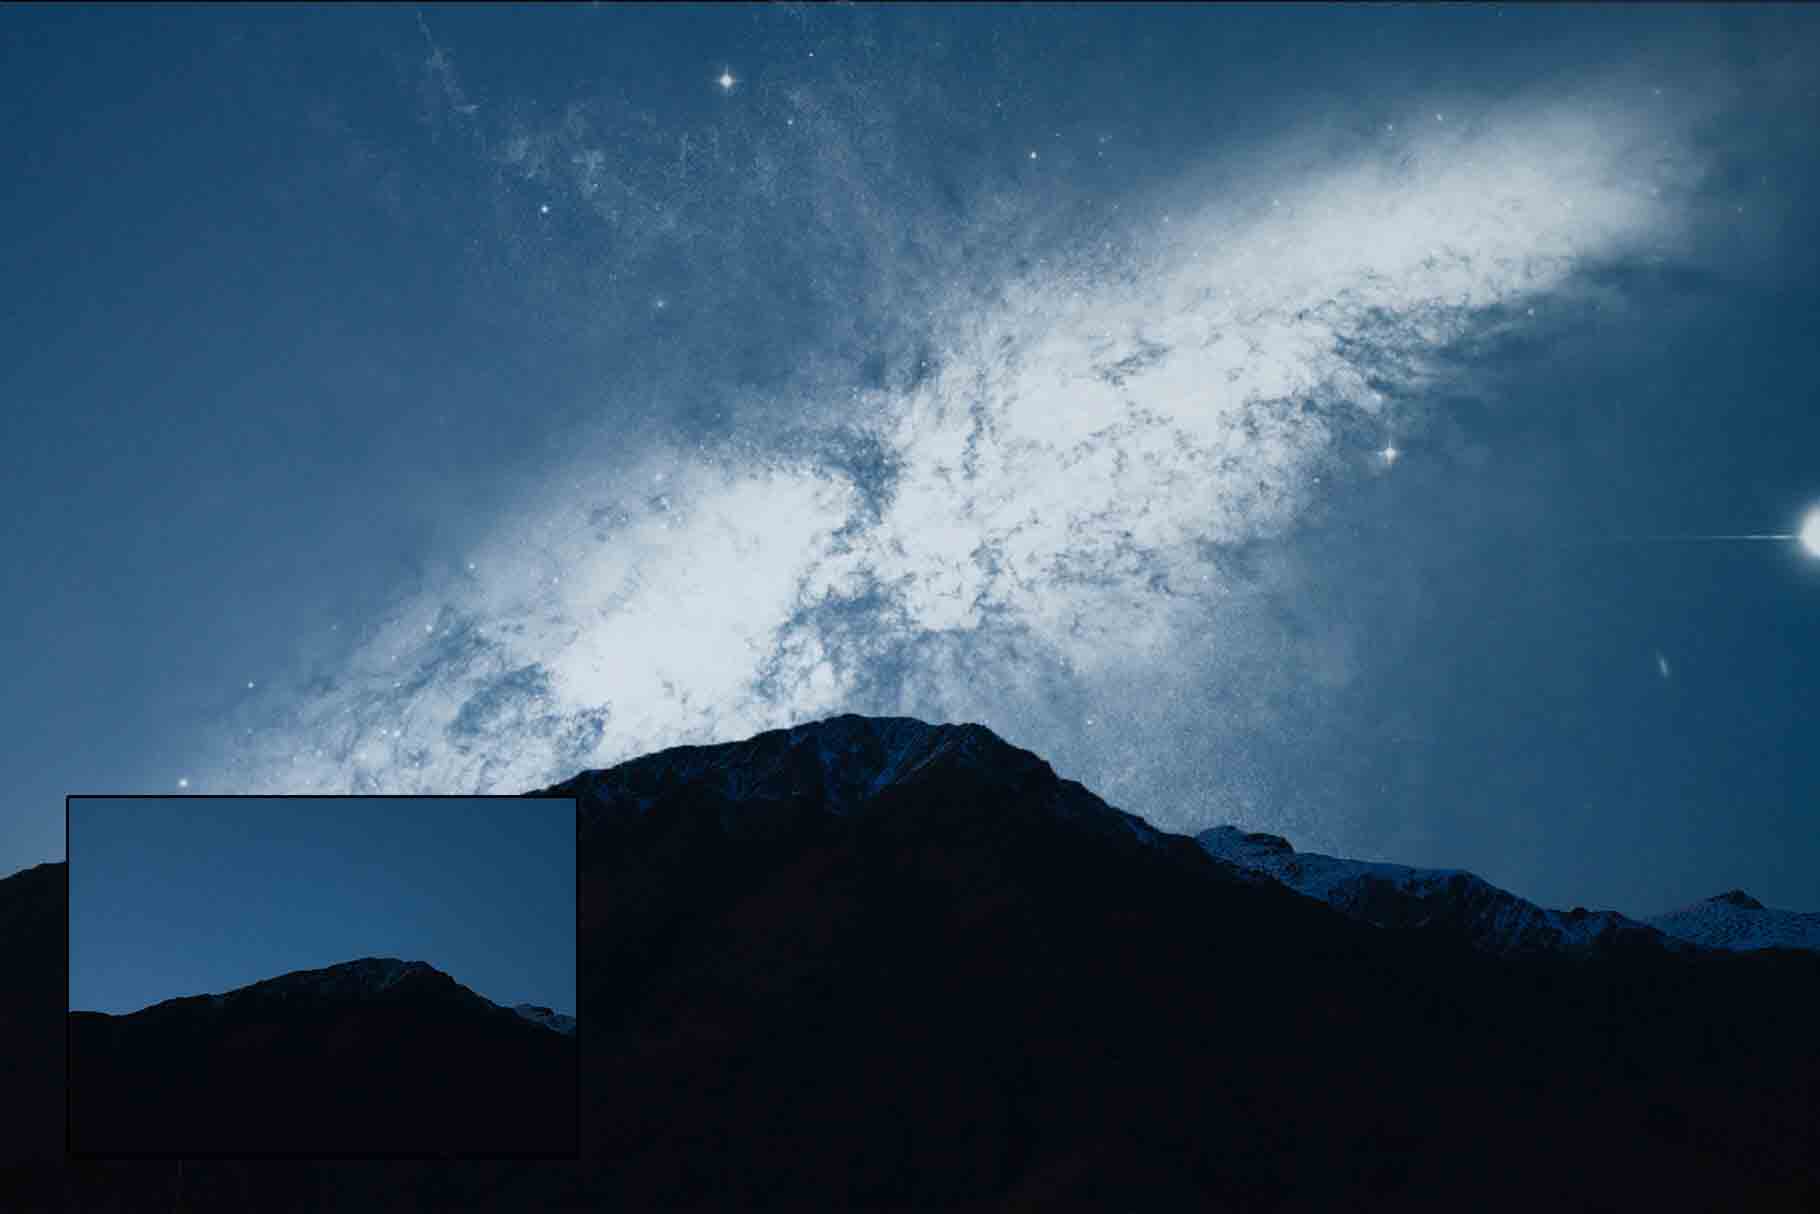 mountain silhouette at night with cosmic weather painted into it before and after